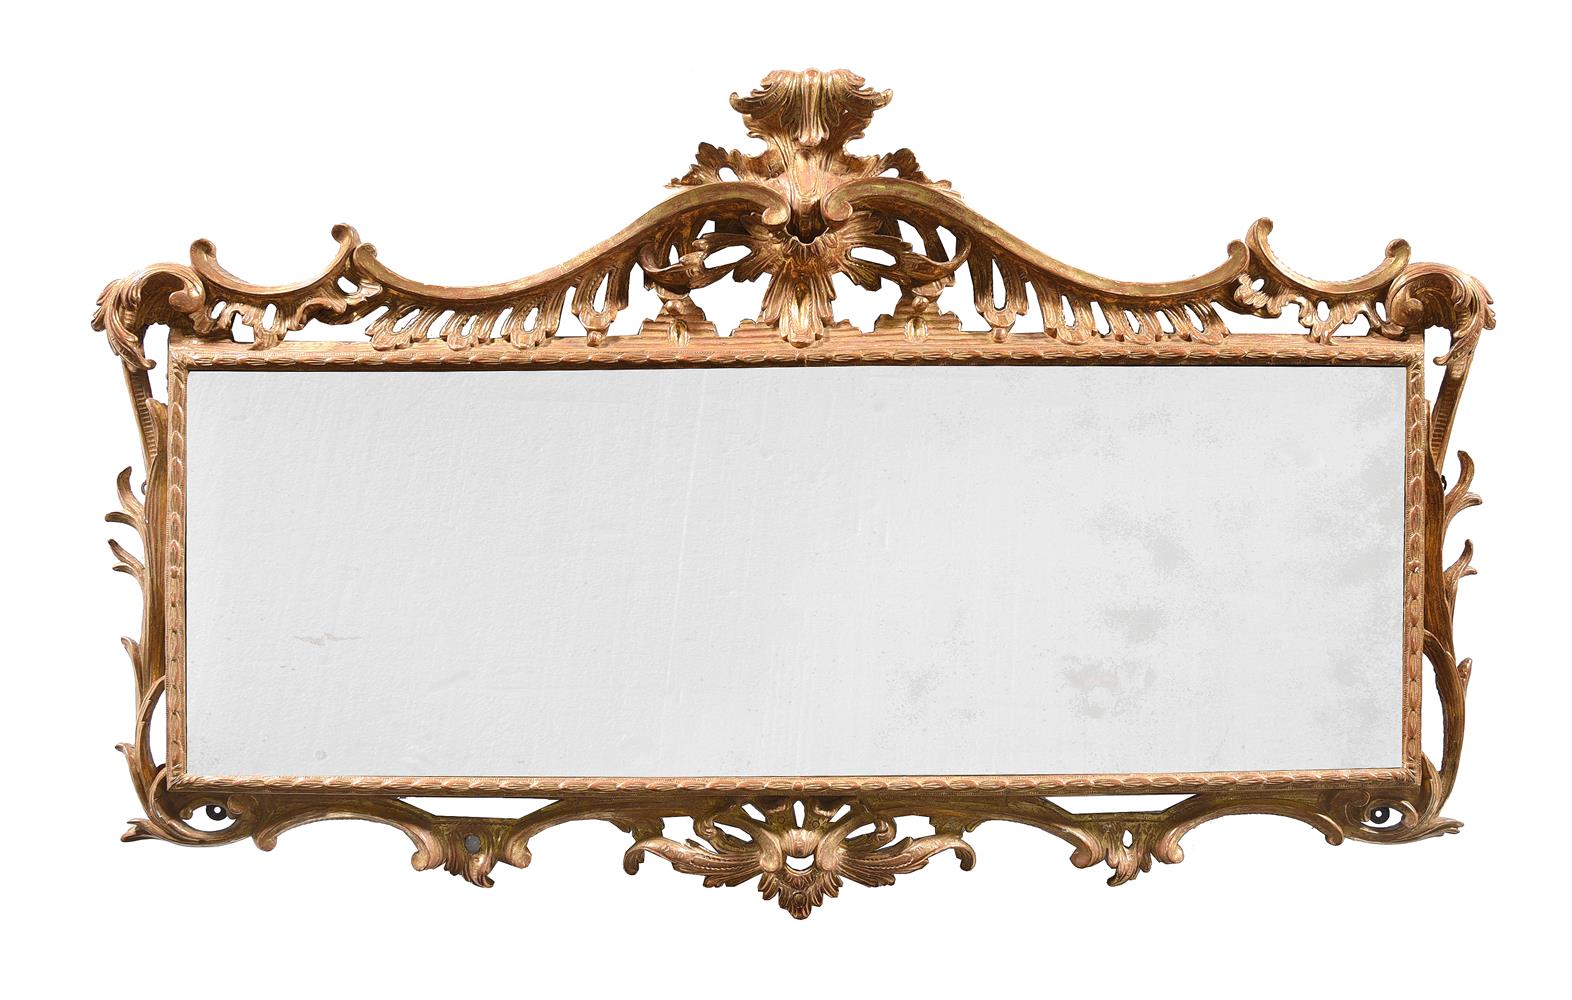 A GEORGE II CARVED GILTWOOD MIRROR, MID 18TH CENTURY